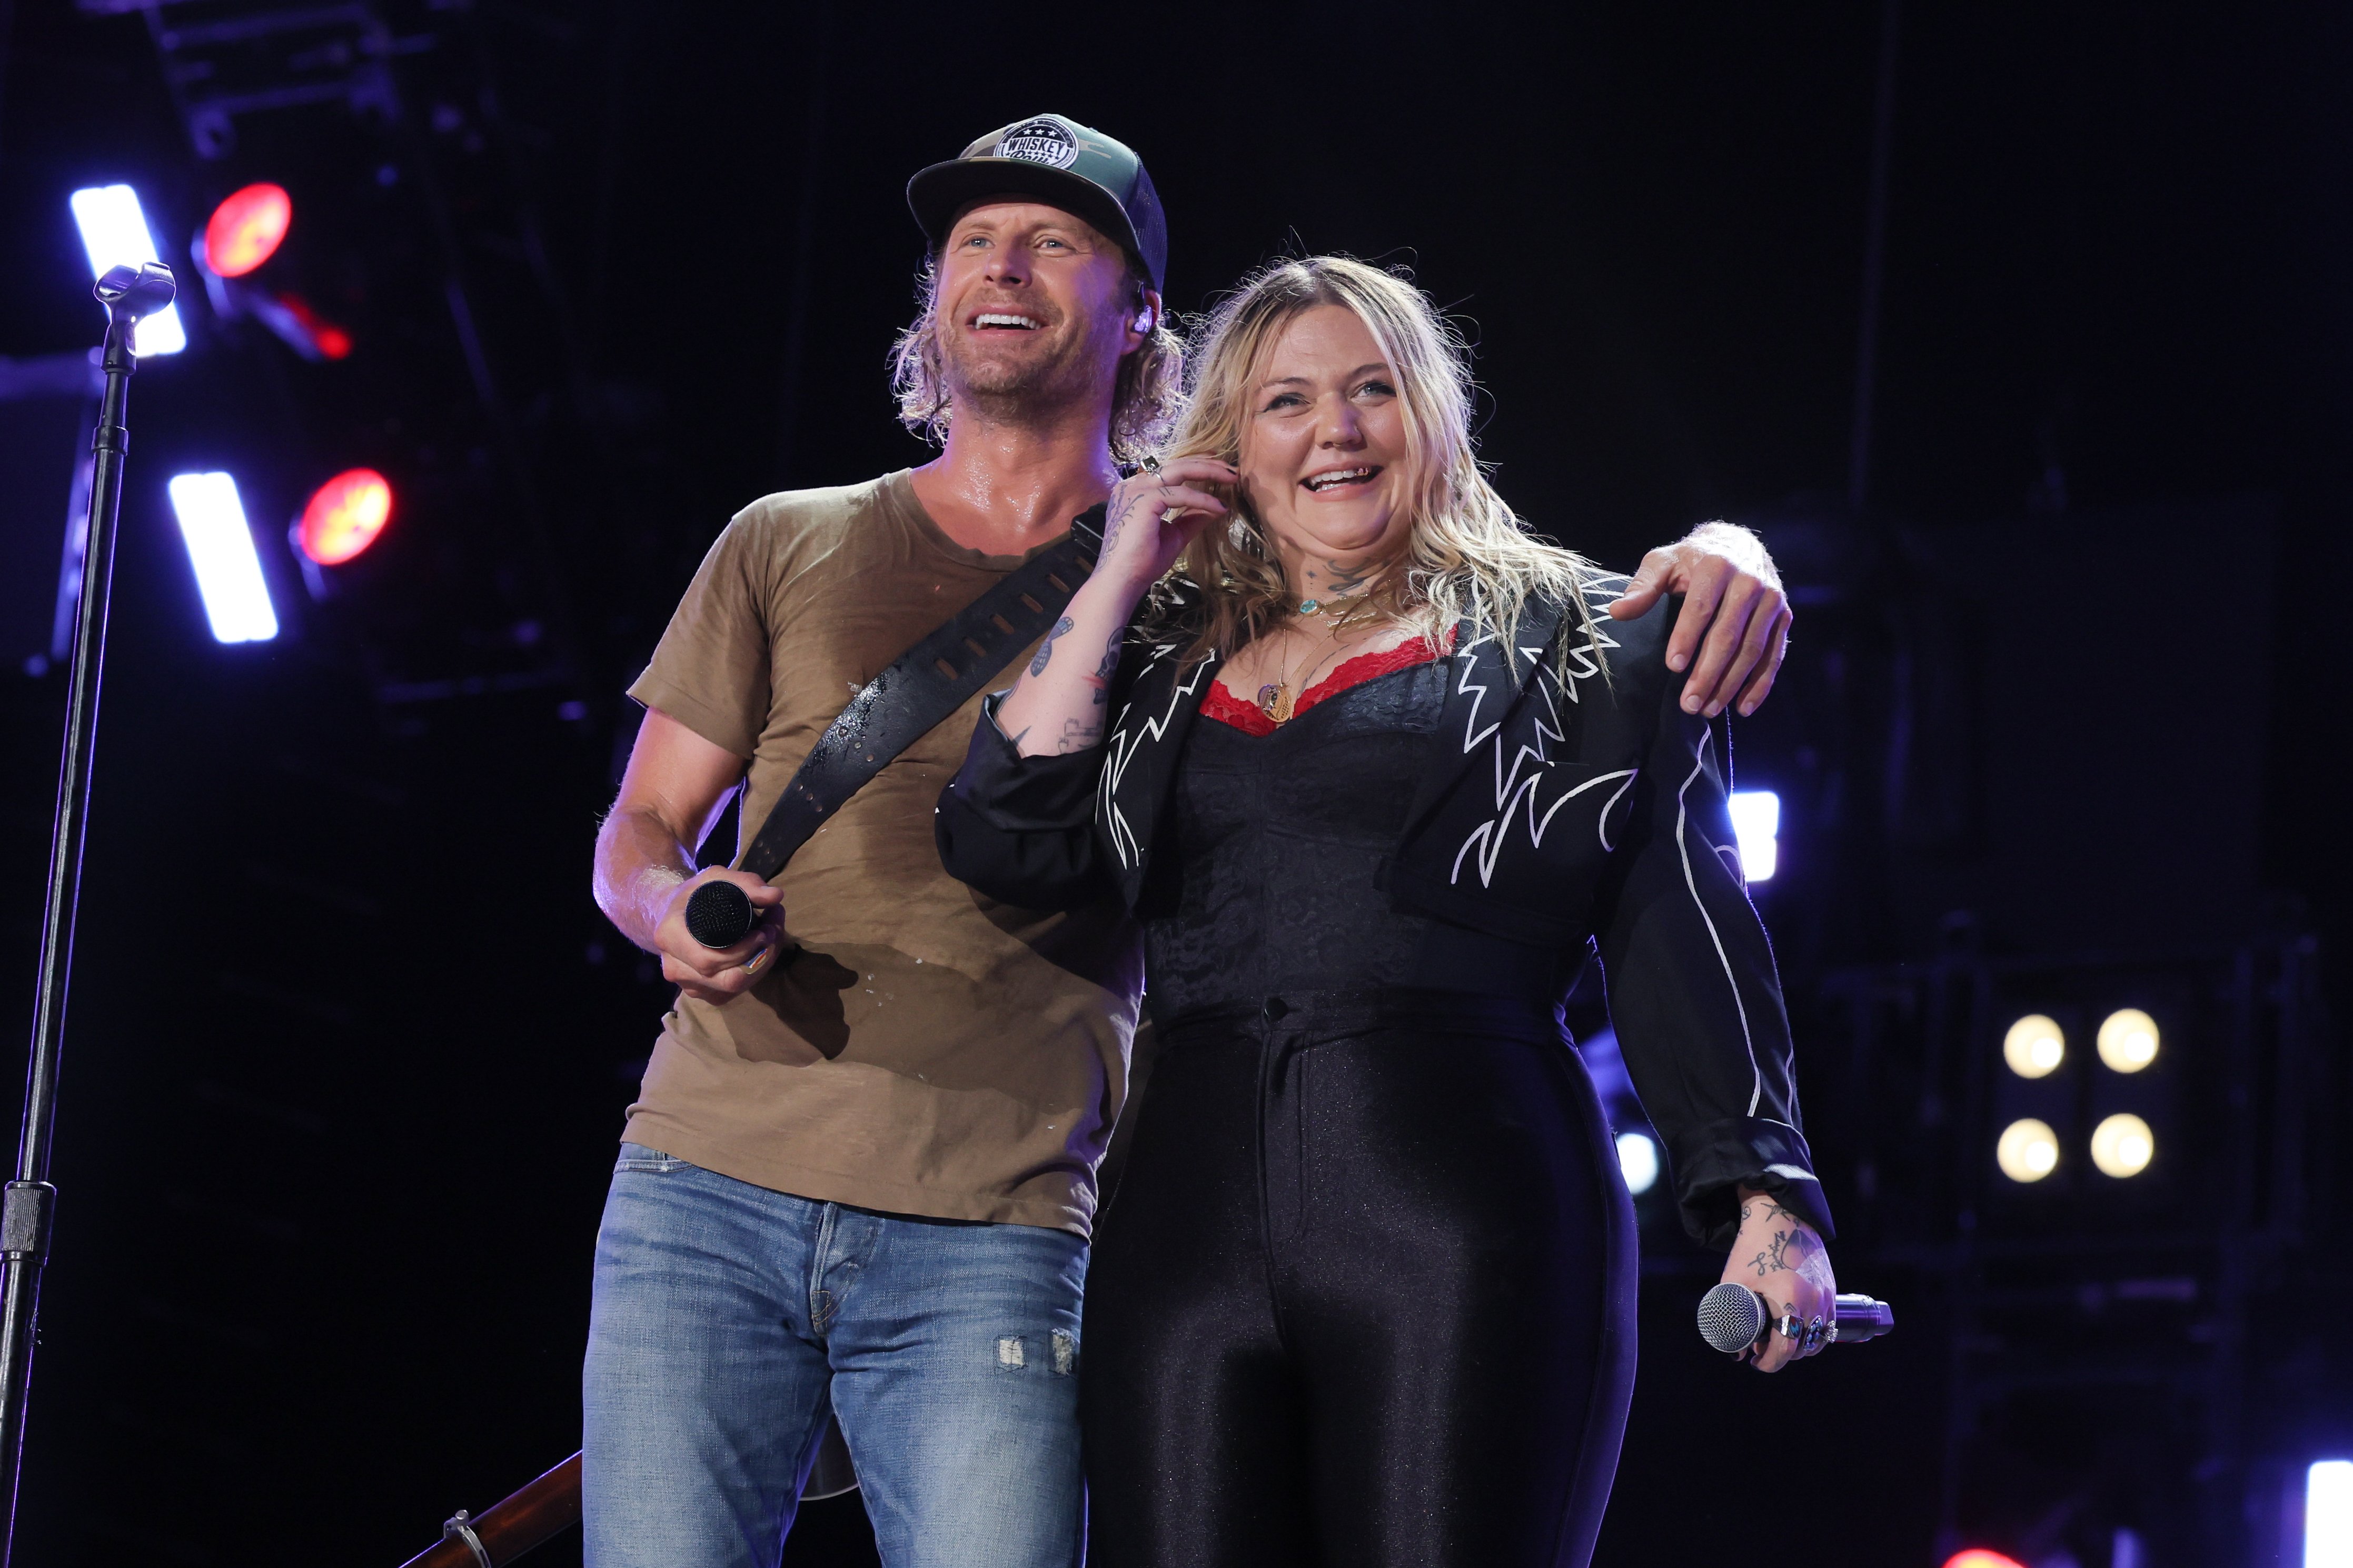 Elle King and Dierks Bentley perform during day 4 of CMA Fest 2022